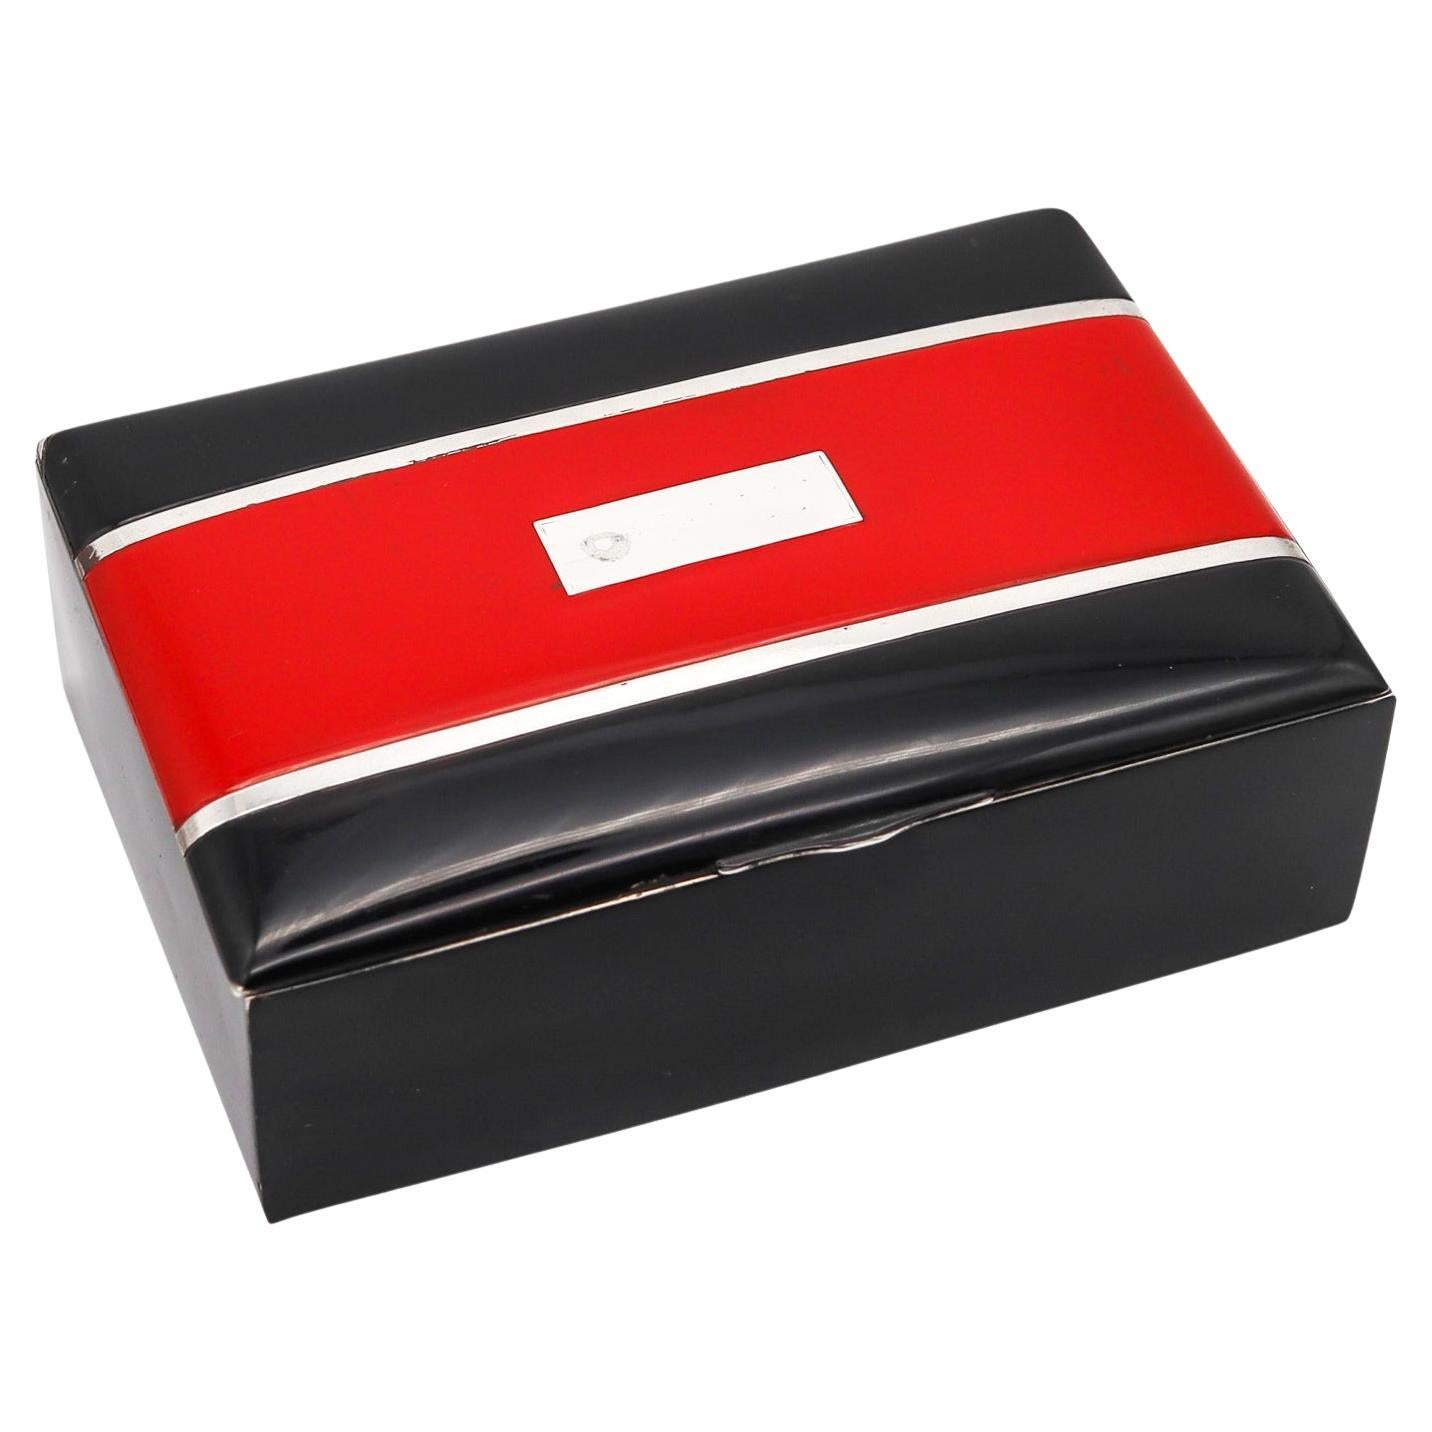 Charles Thomae 1925 Art Deco Box with Red and Black Lacquer in Sterling Silver